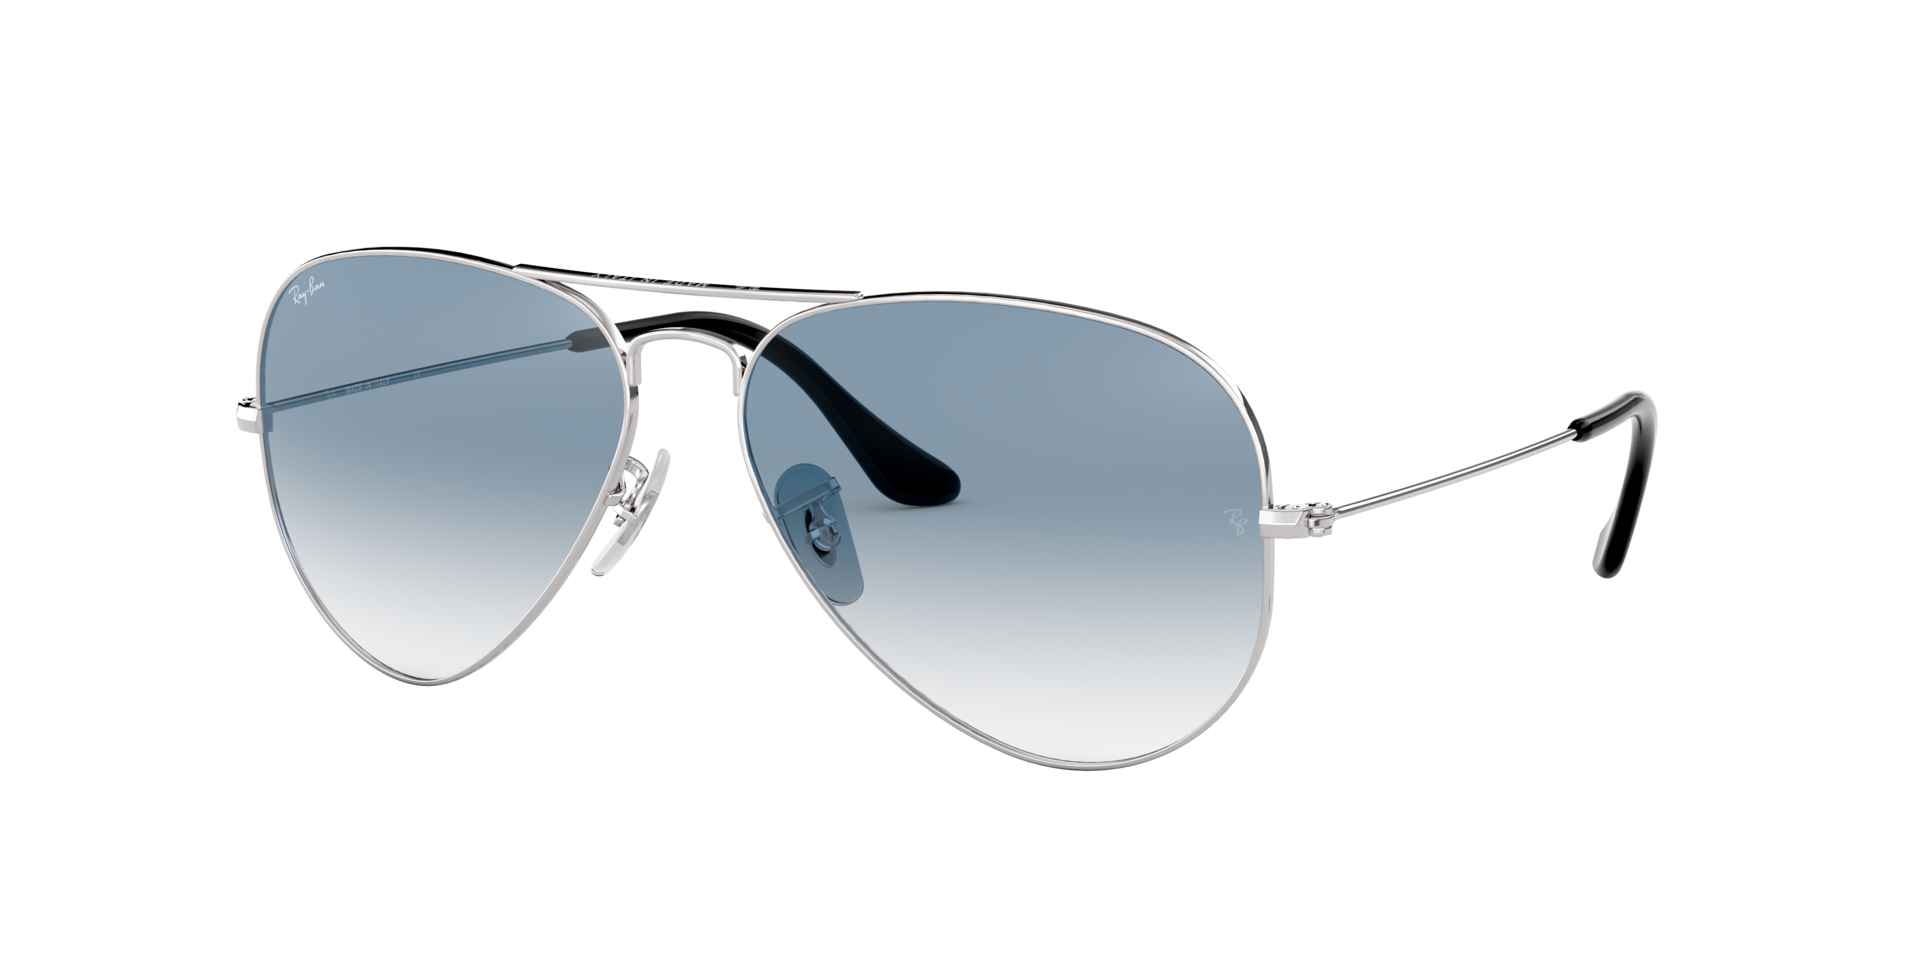 Ray-Ban Aviator Large Metal Sonnenbrille RB3025 003/3F 55